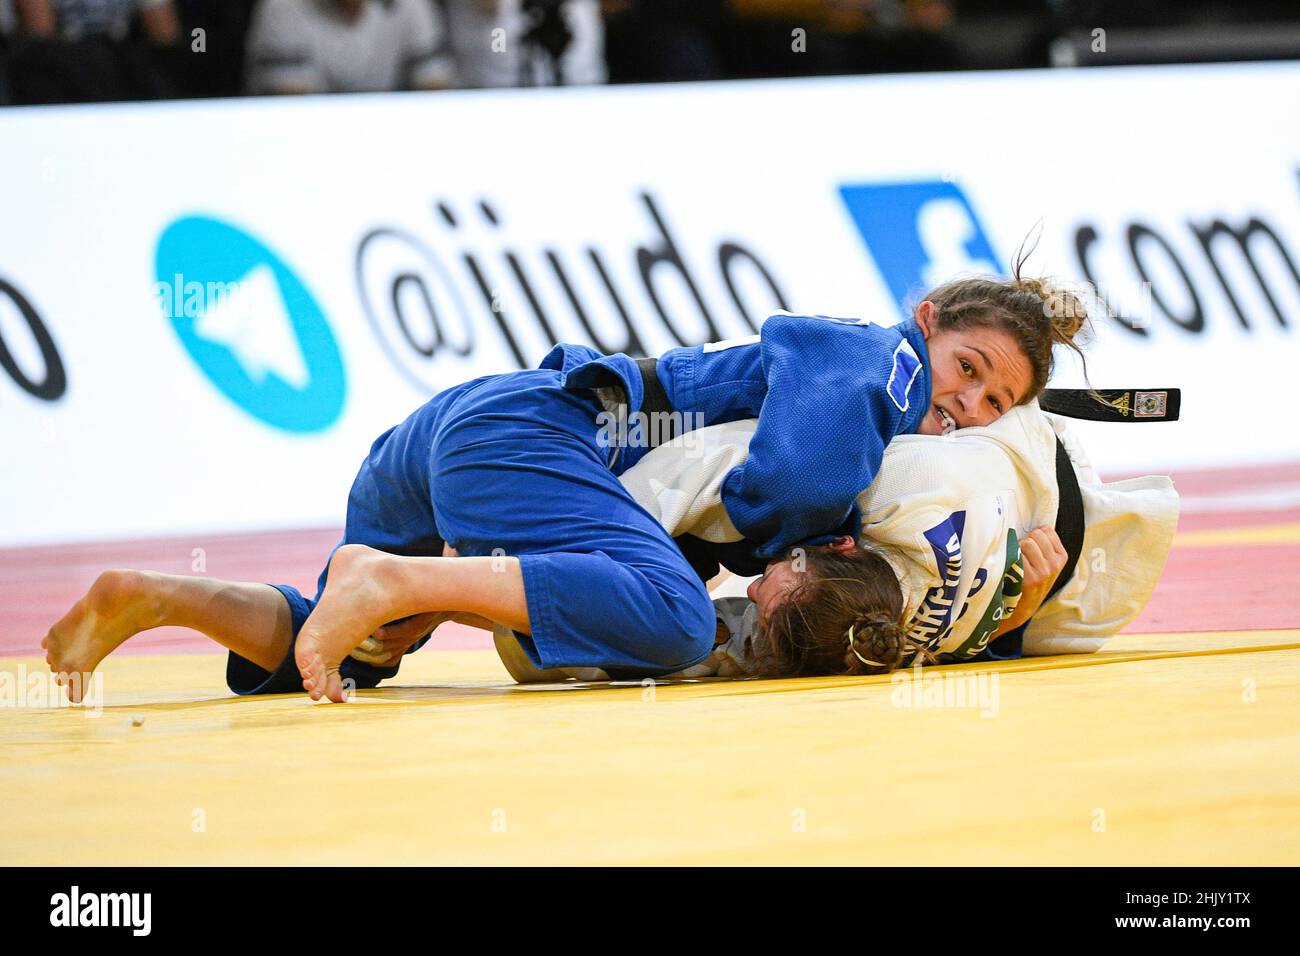 Women -52 kg, Chloe DEVICTOR of France competes and wins by ippon (osaekomi) during the Paris Grand Slam 2021, Judo event on October 16, 2021 at Accor Stock Photo